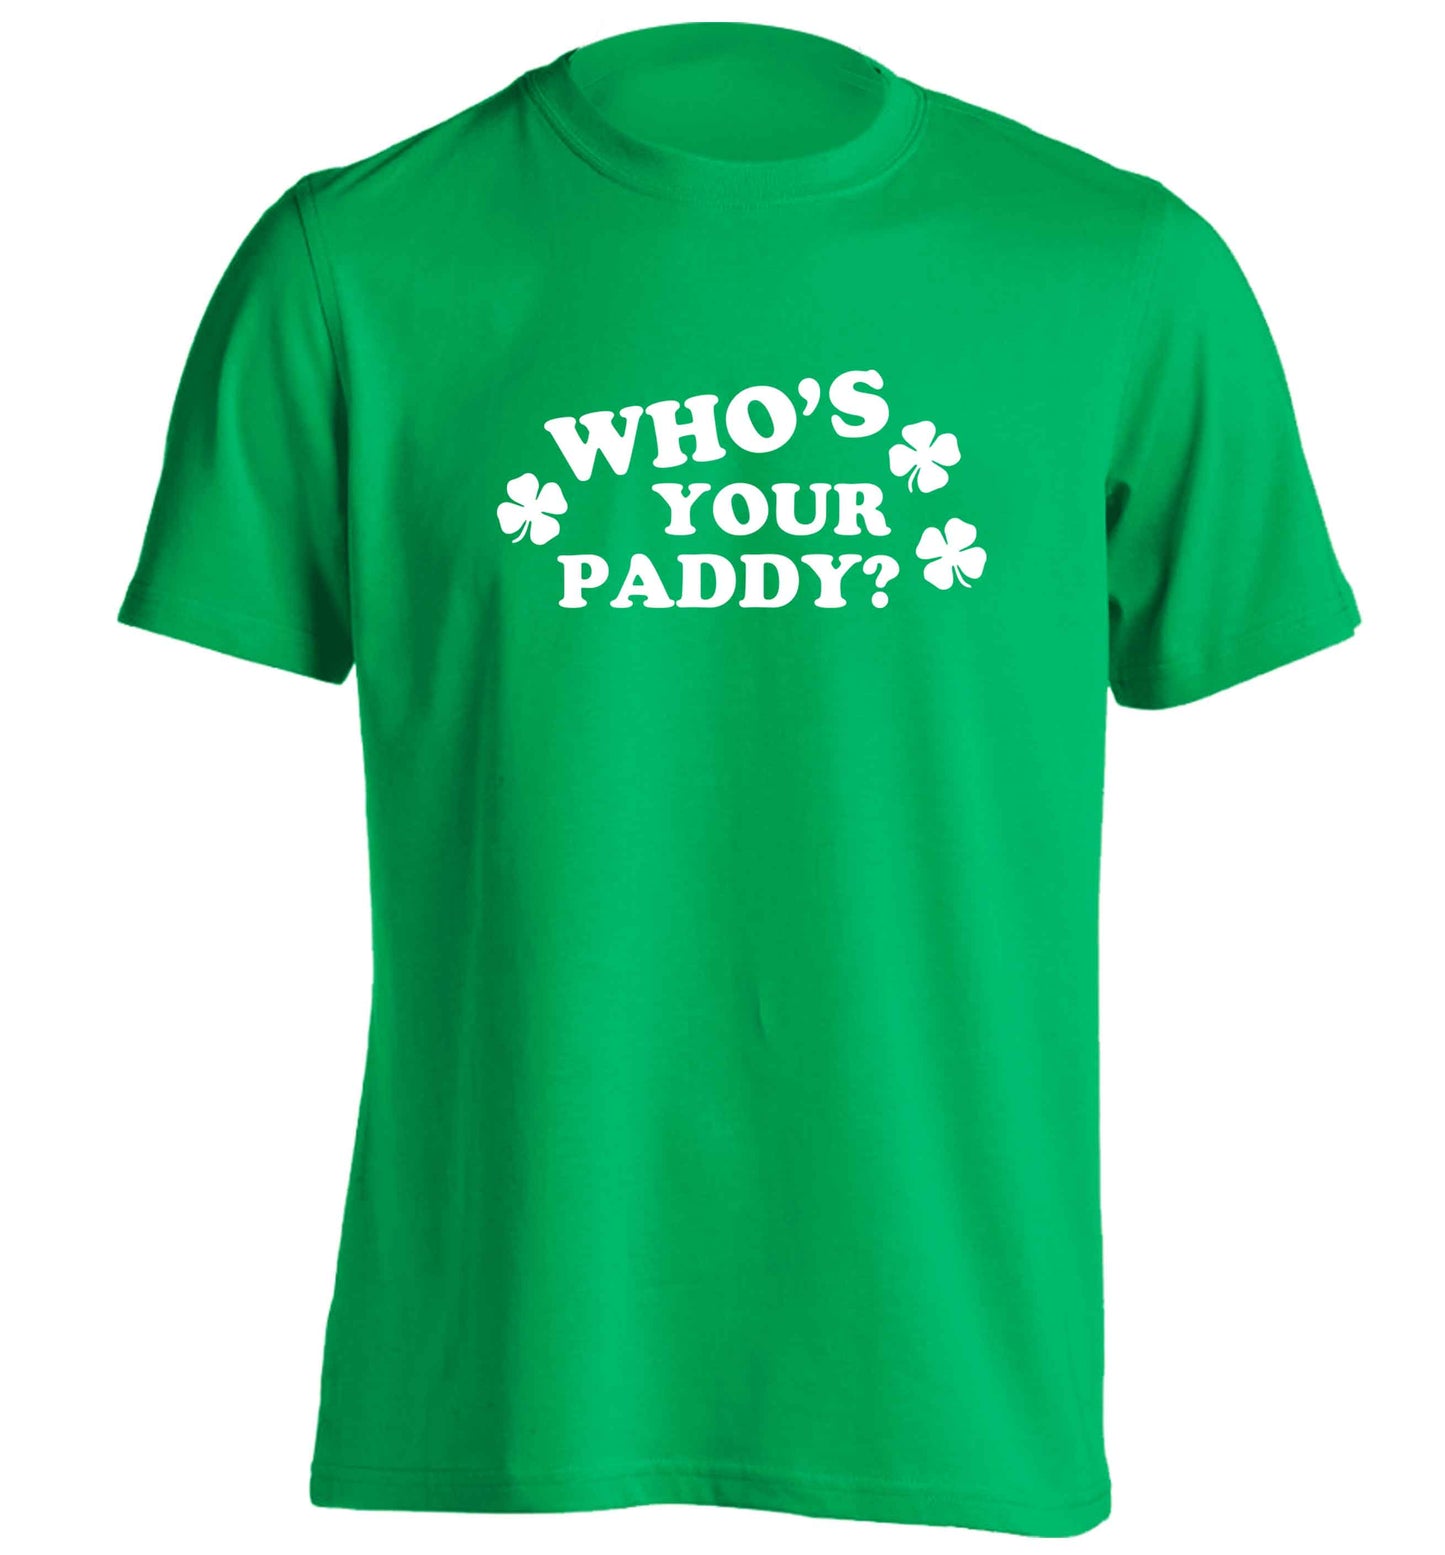 Who's your paddy? adults unisex green Tshirt 2XL